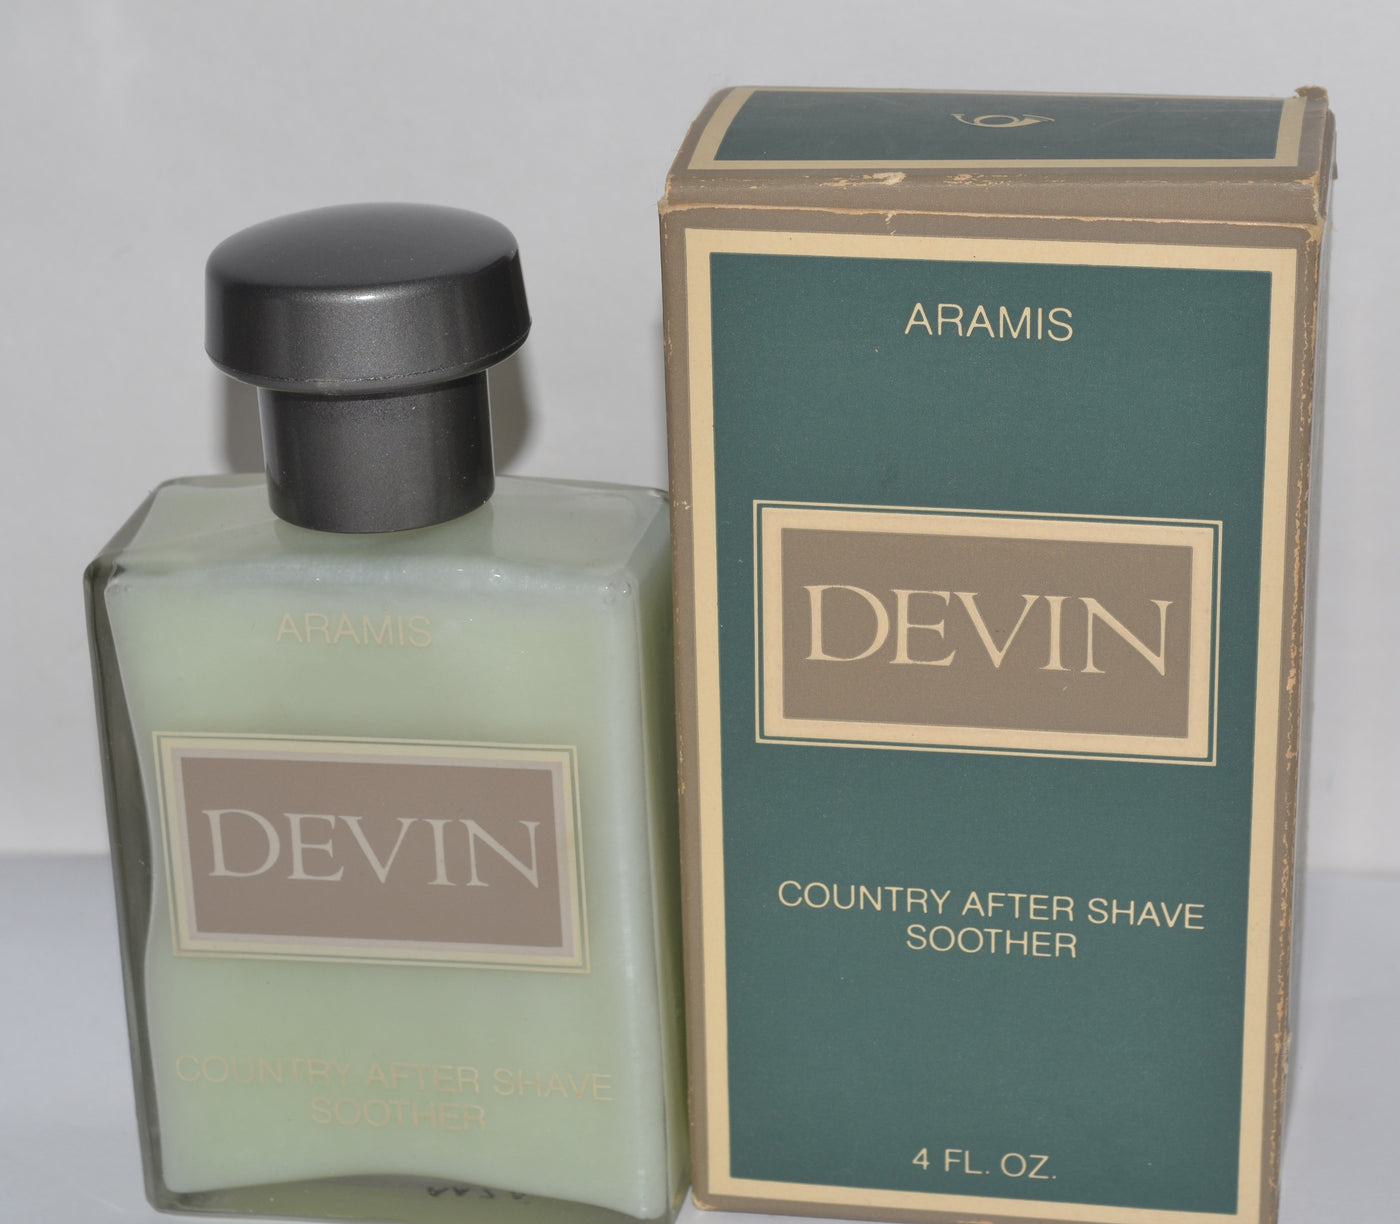 Aramis Devin Country After Shave Soother